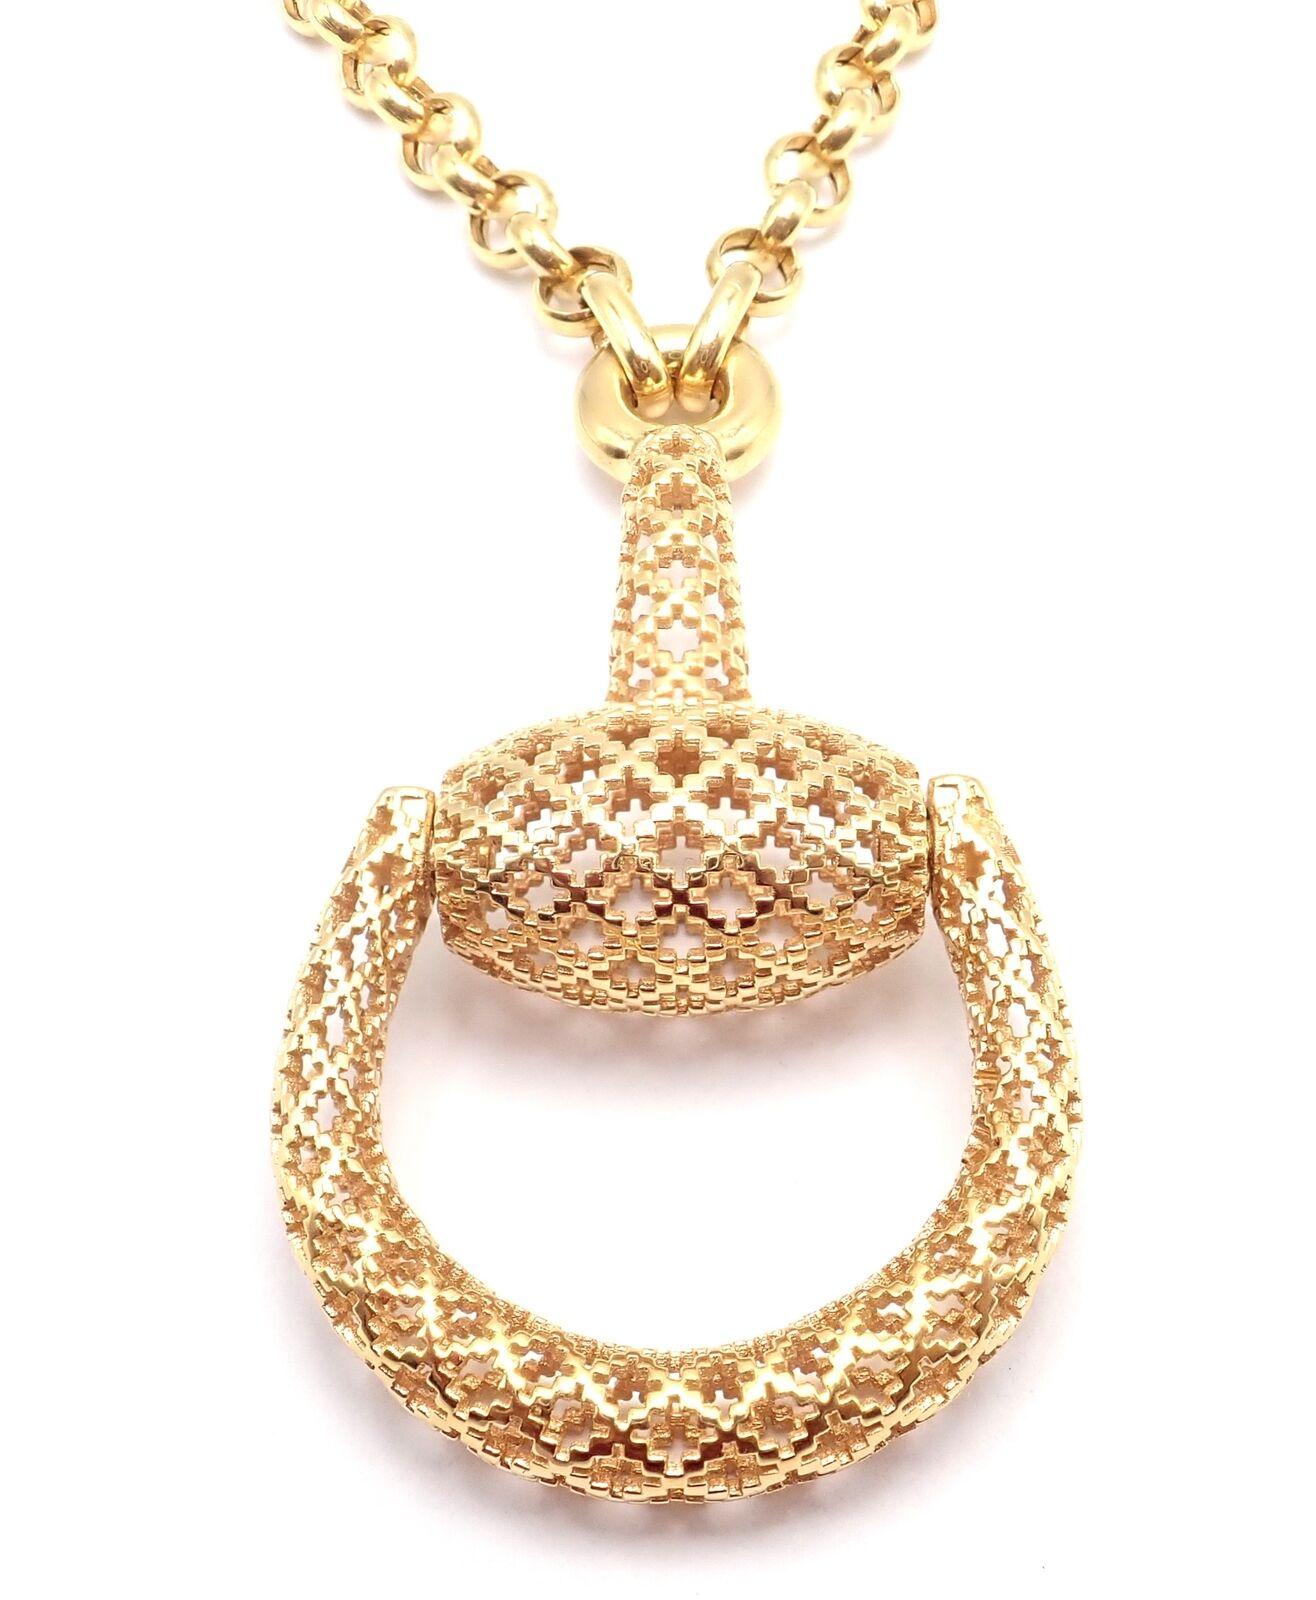 18k yellow gold Large Horsebit Pendant Link Chain Necklace by Gucci.
Details:
Chain Length: 22